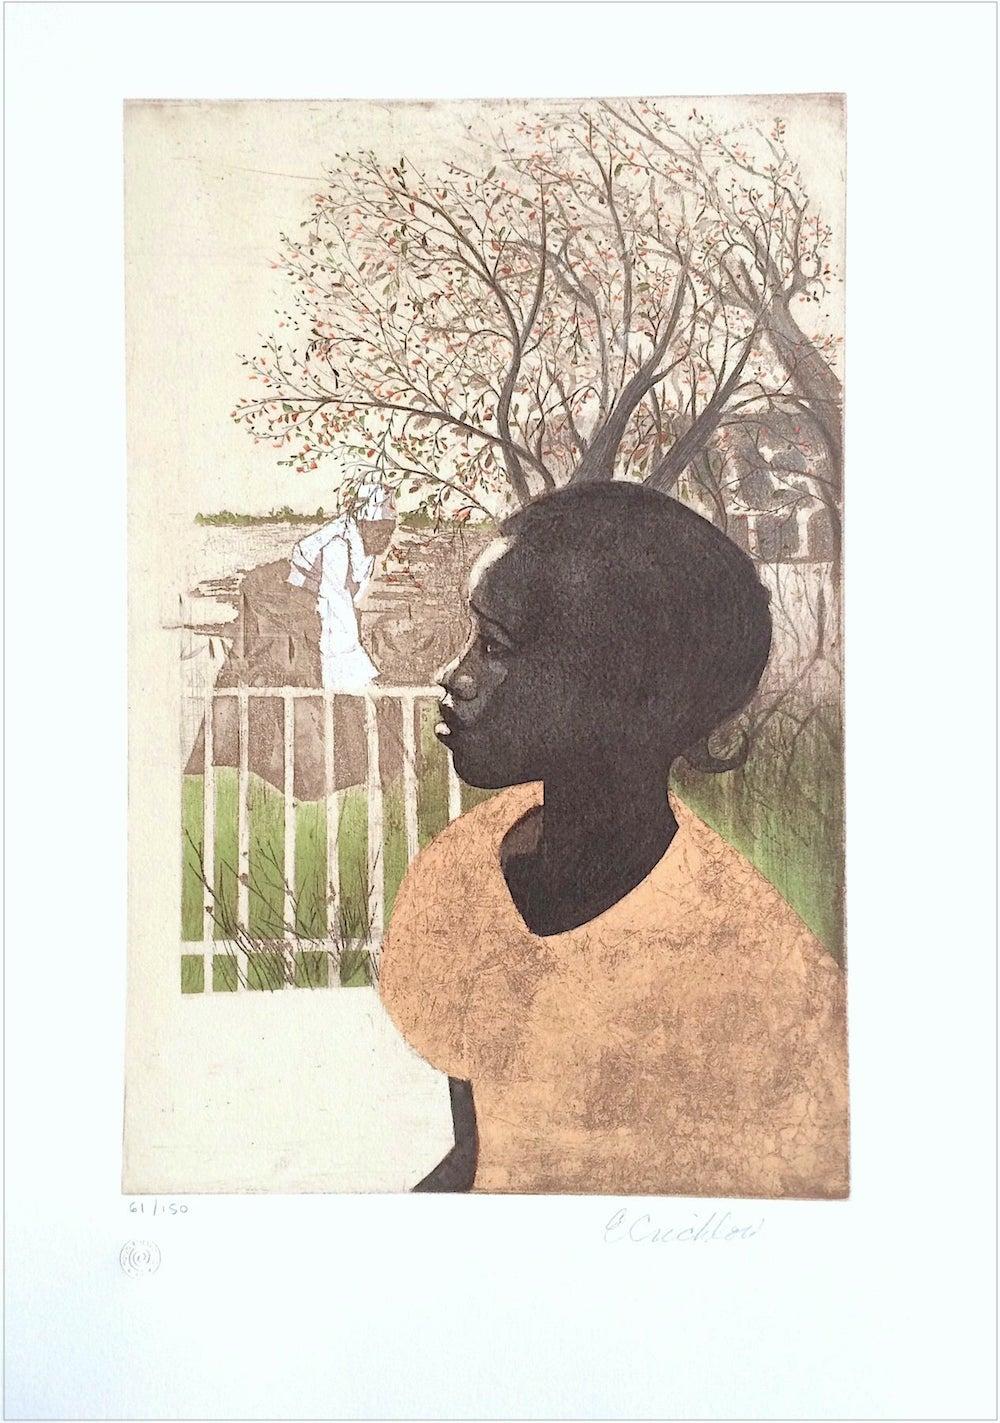 NEW DREAMS Signed Lithograph, Black History, African American Women - Beige Figurative Print by Ernest Crichlow